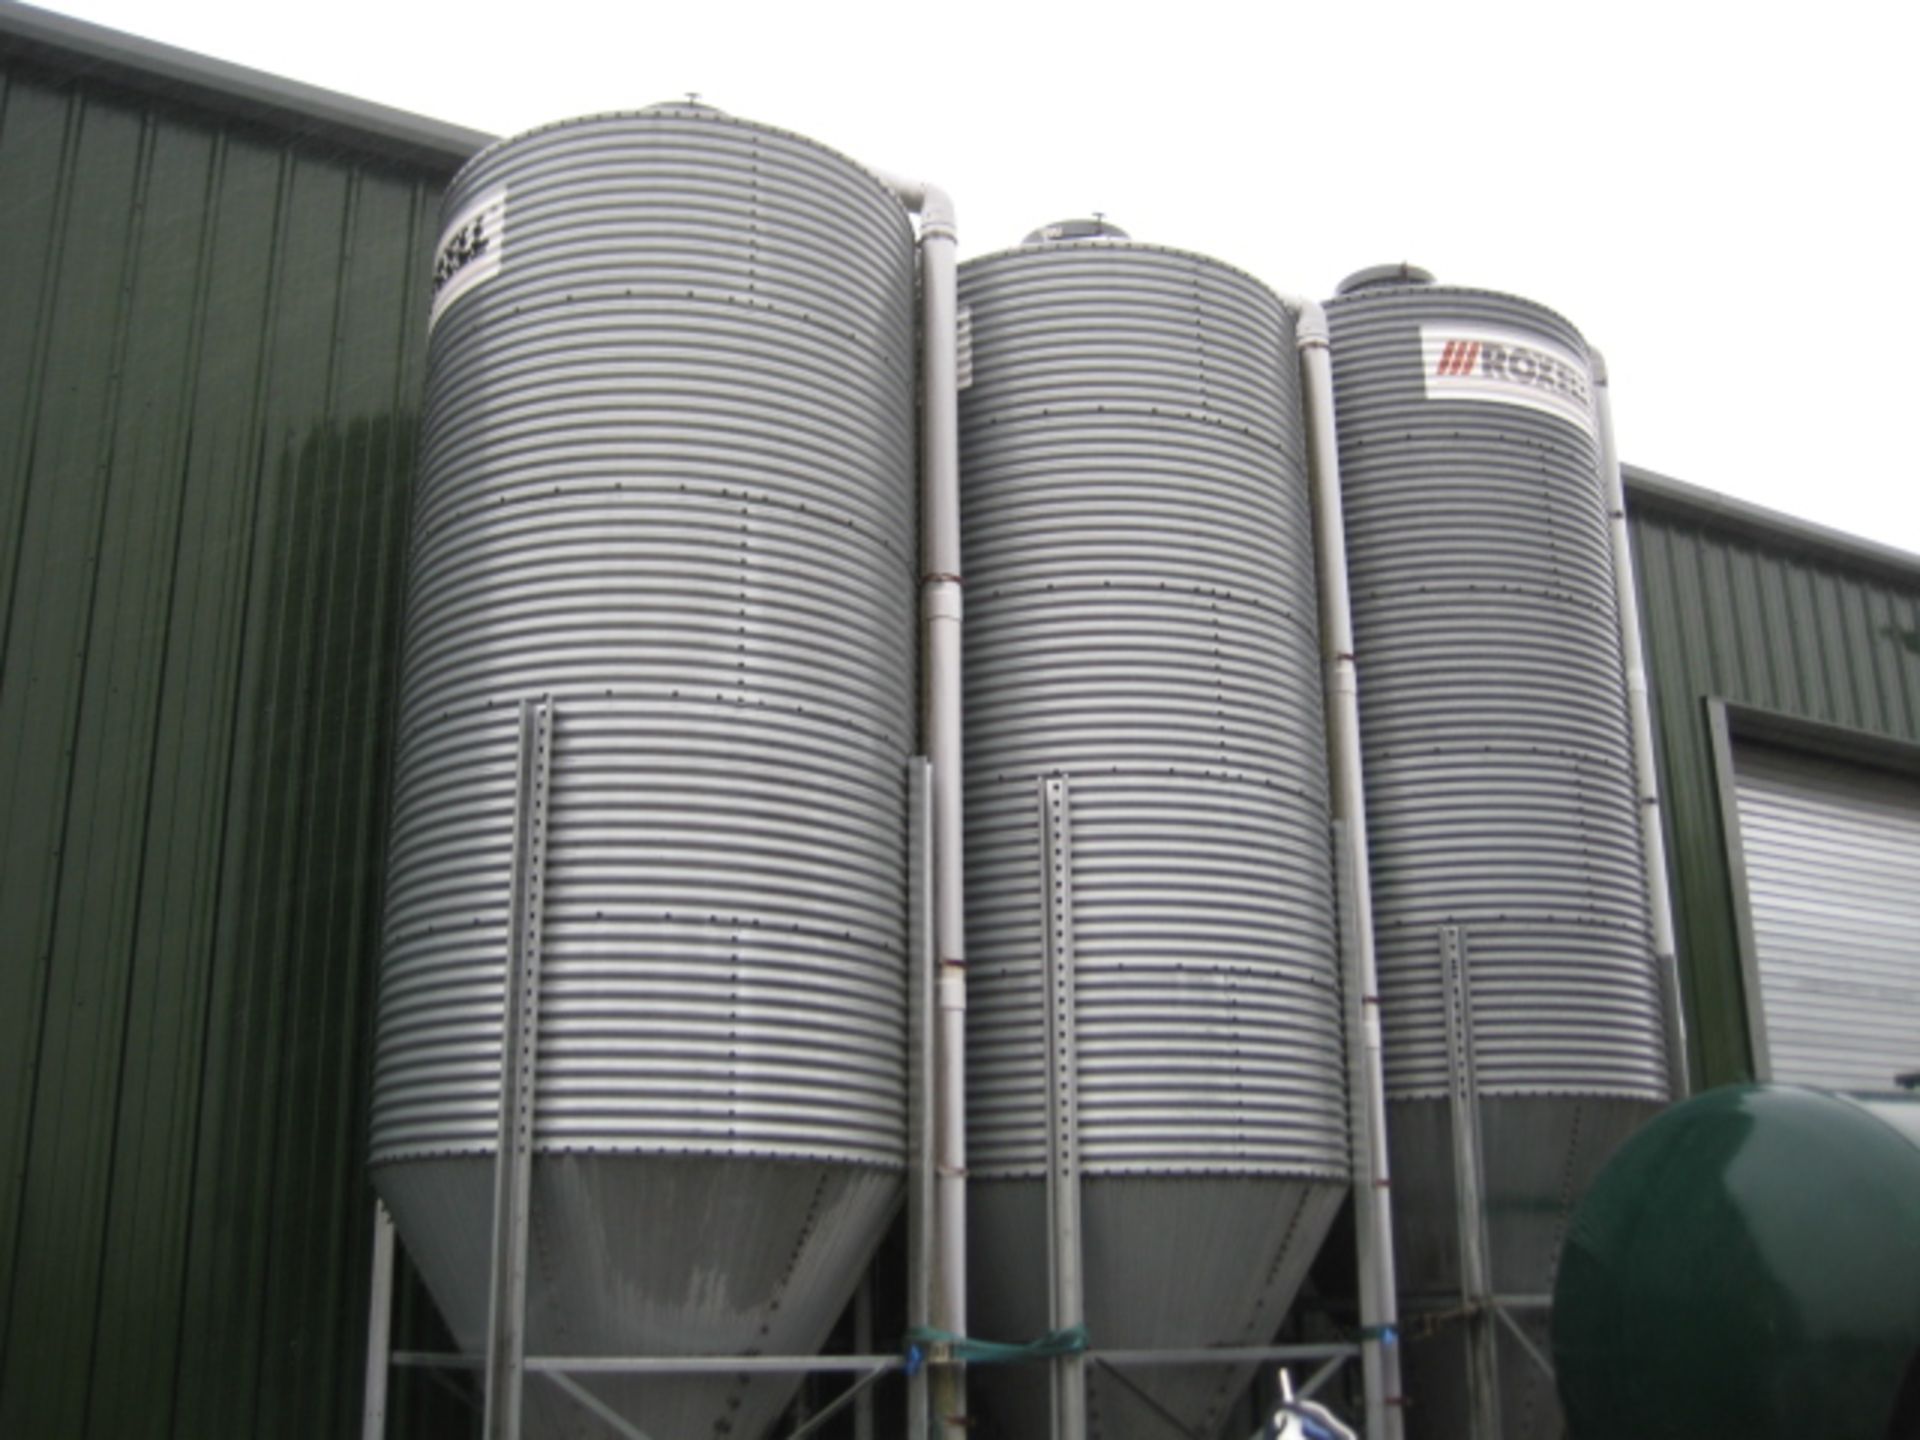 Feed Bins - Feed bins of various sizes. (9 remaining) (UCPE 6346) Price - £4,000 each. Please read